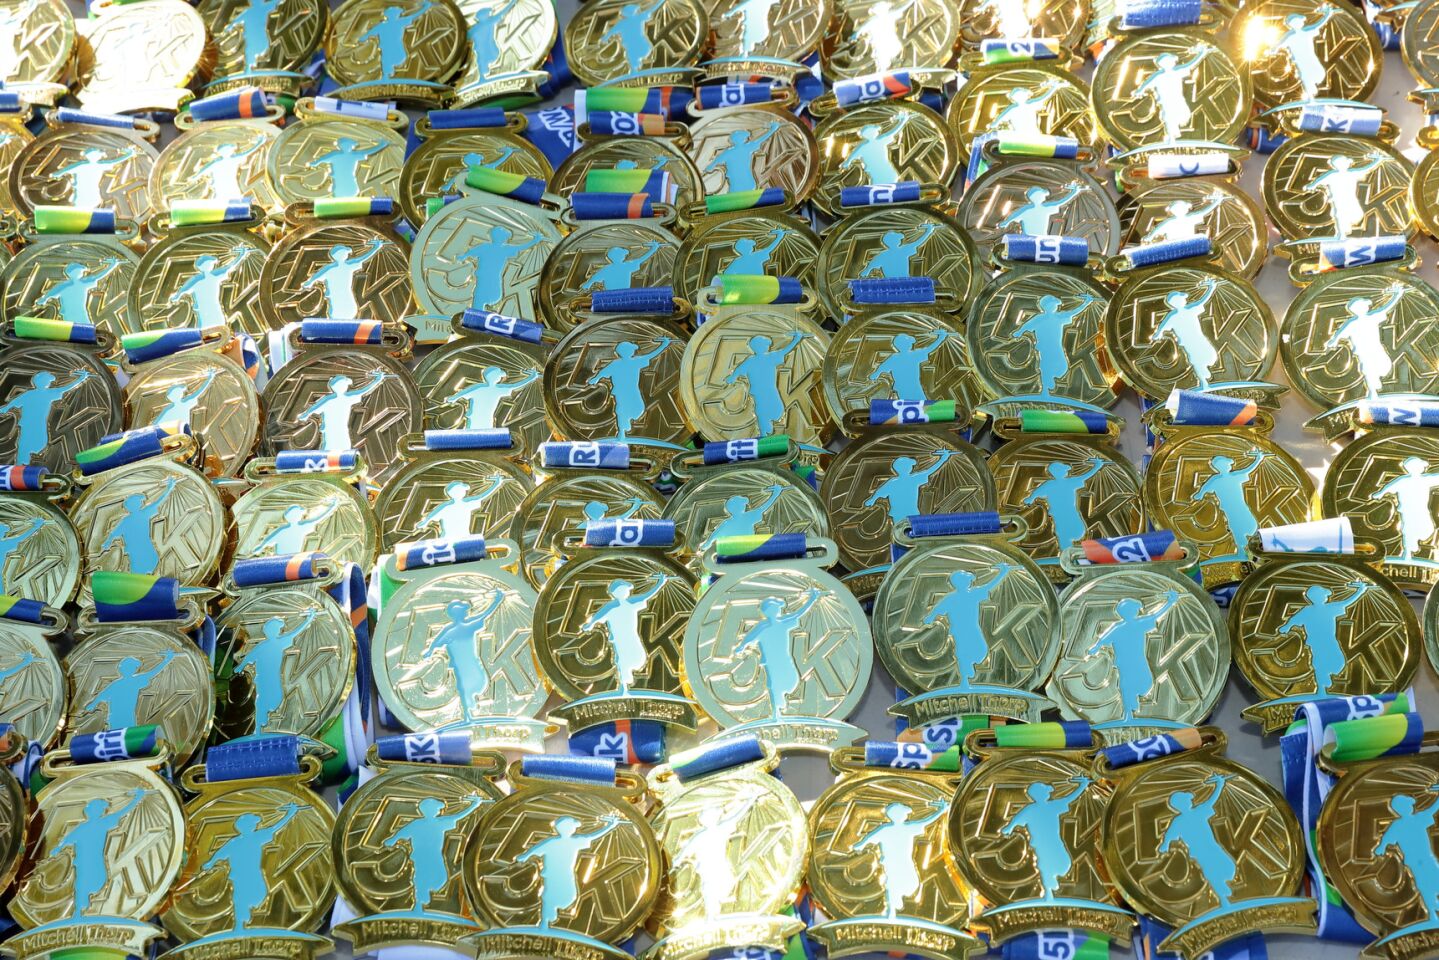 Medals for the race participants